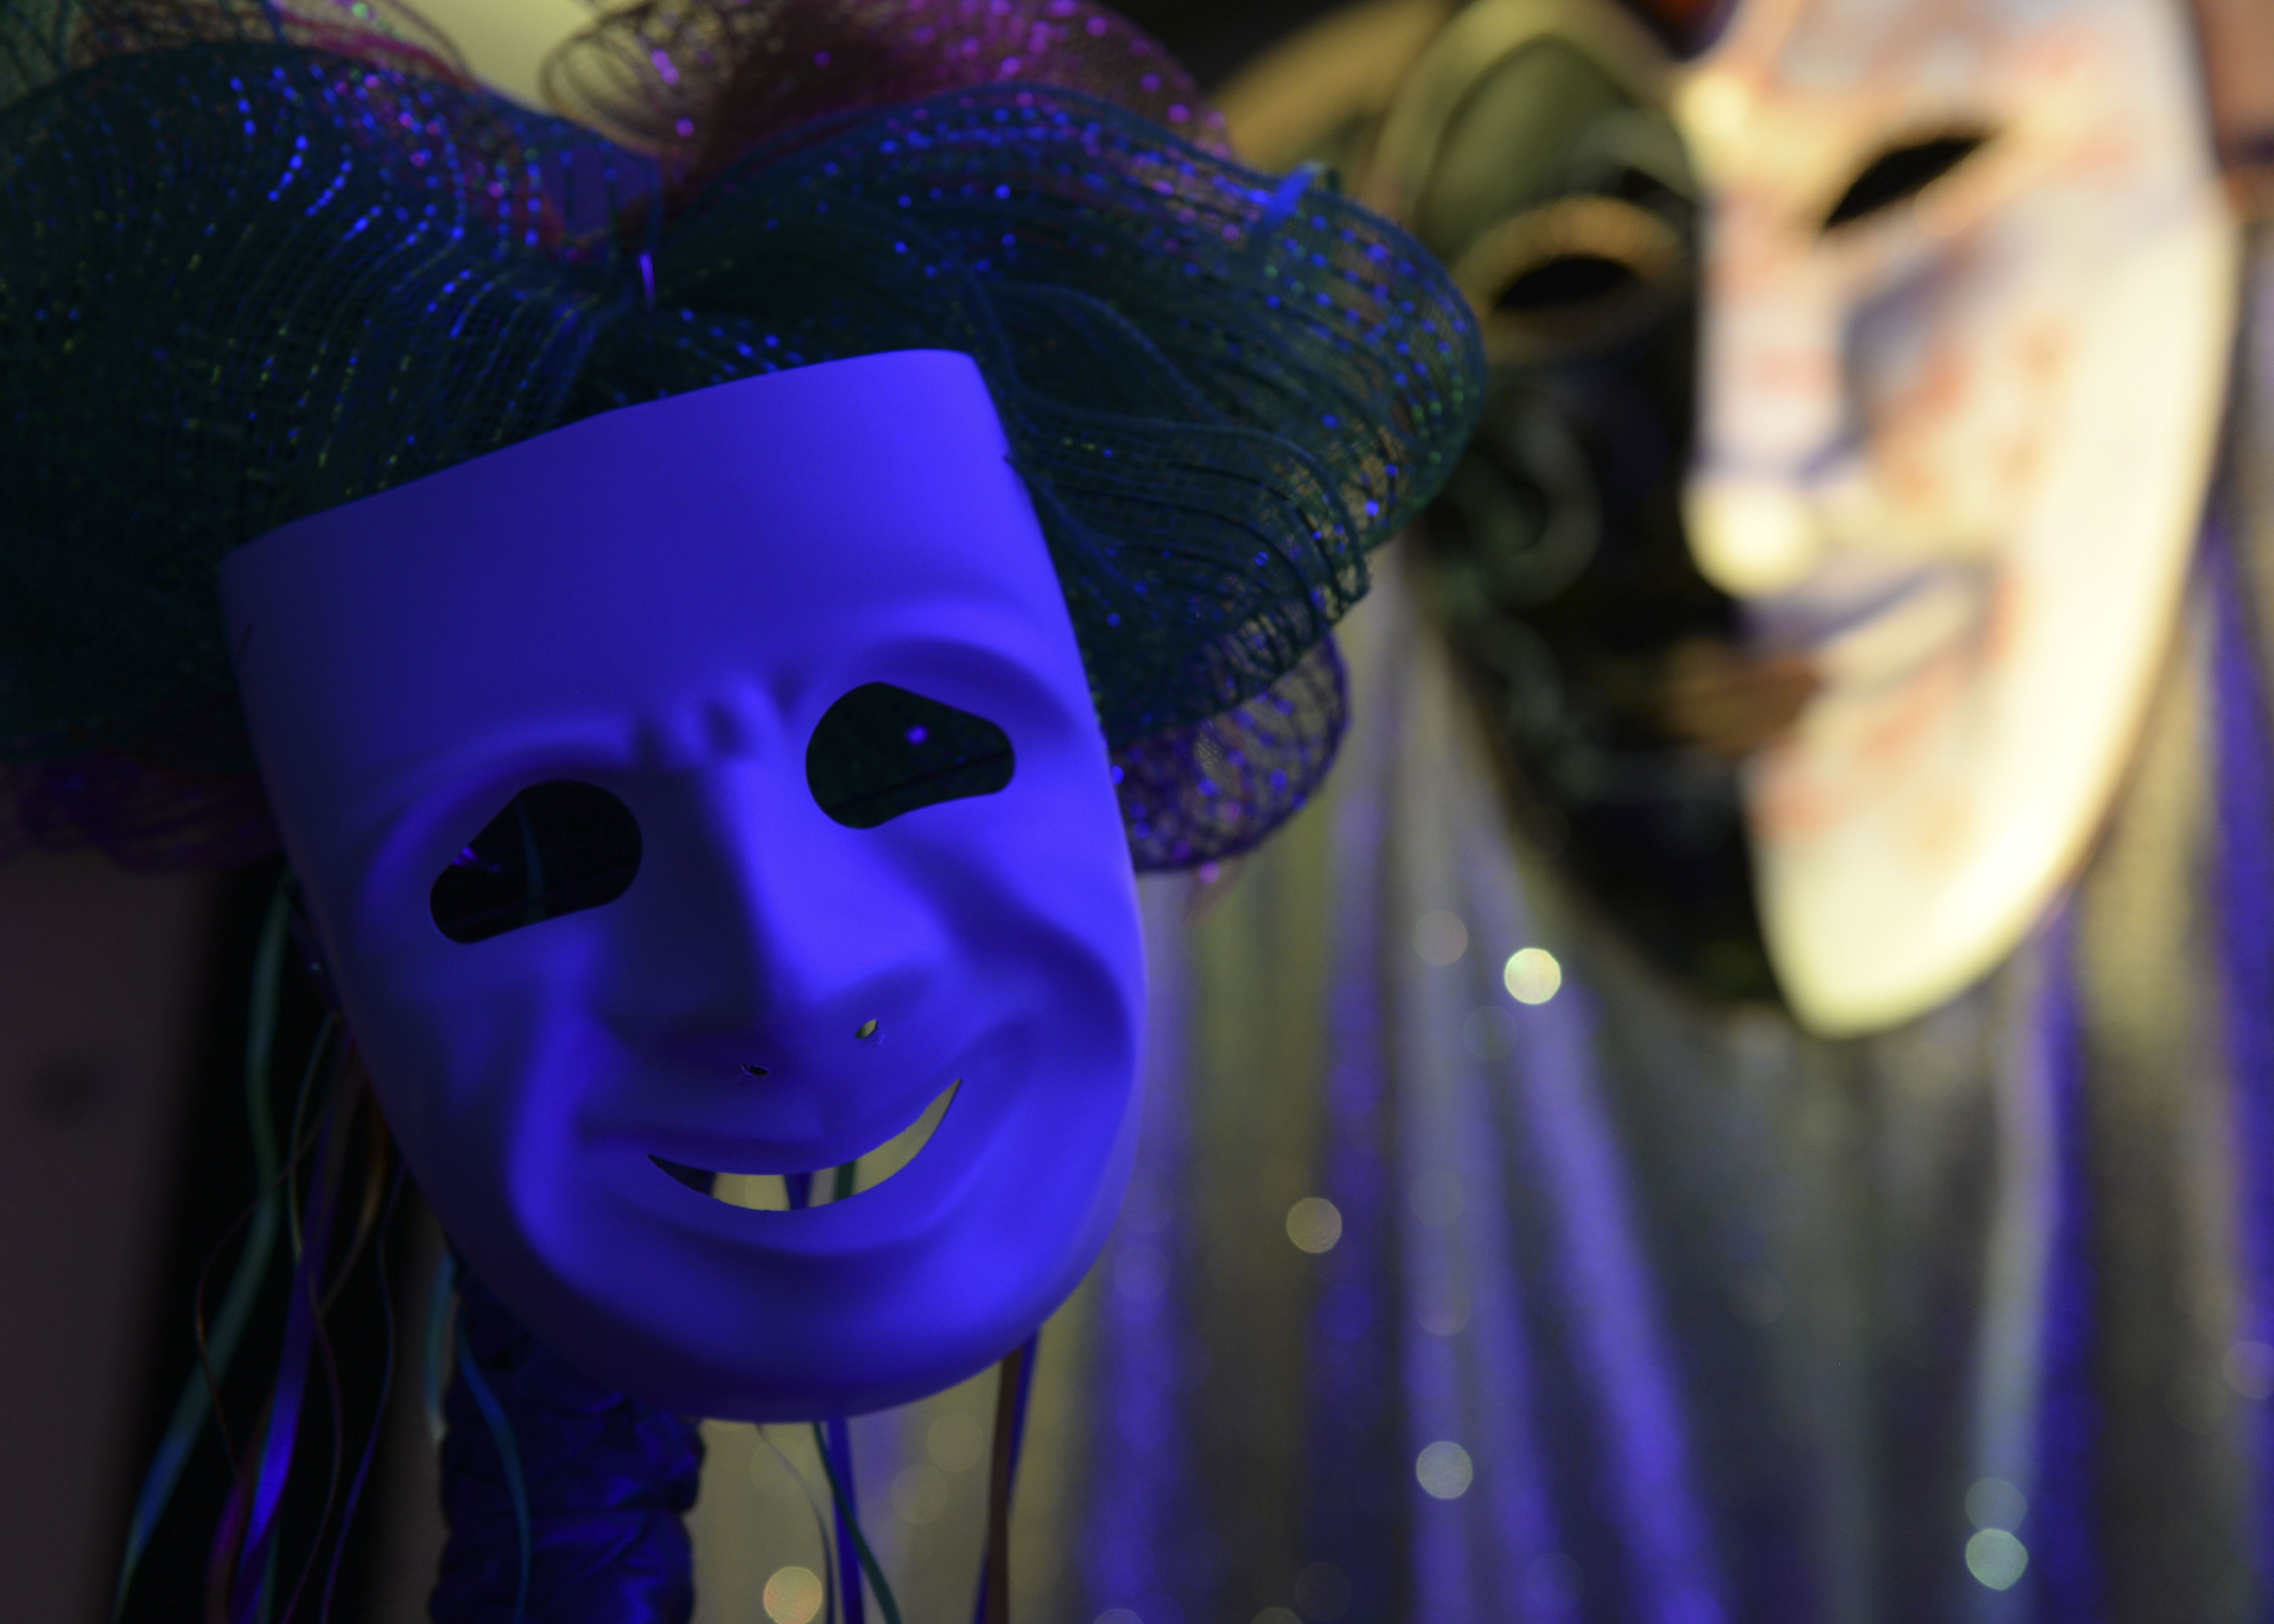 Masks and other decorations sit on display during the Mardi Gras celebration hosted by the 633rd Force Support Squadron in the Fort Eustis Club at Joint Base Langley-Eustis, Va., Feb. 9, 2018. Creative masks displaying dramatic expressions have been part of the Louisiana tradition since 1827. (U.S. Air Force photo by Airman 1st Class Monica Roybal)